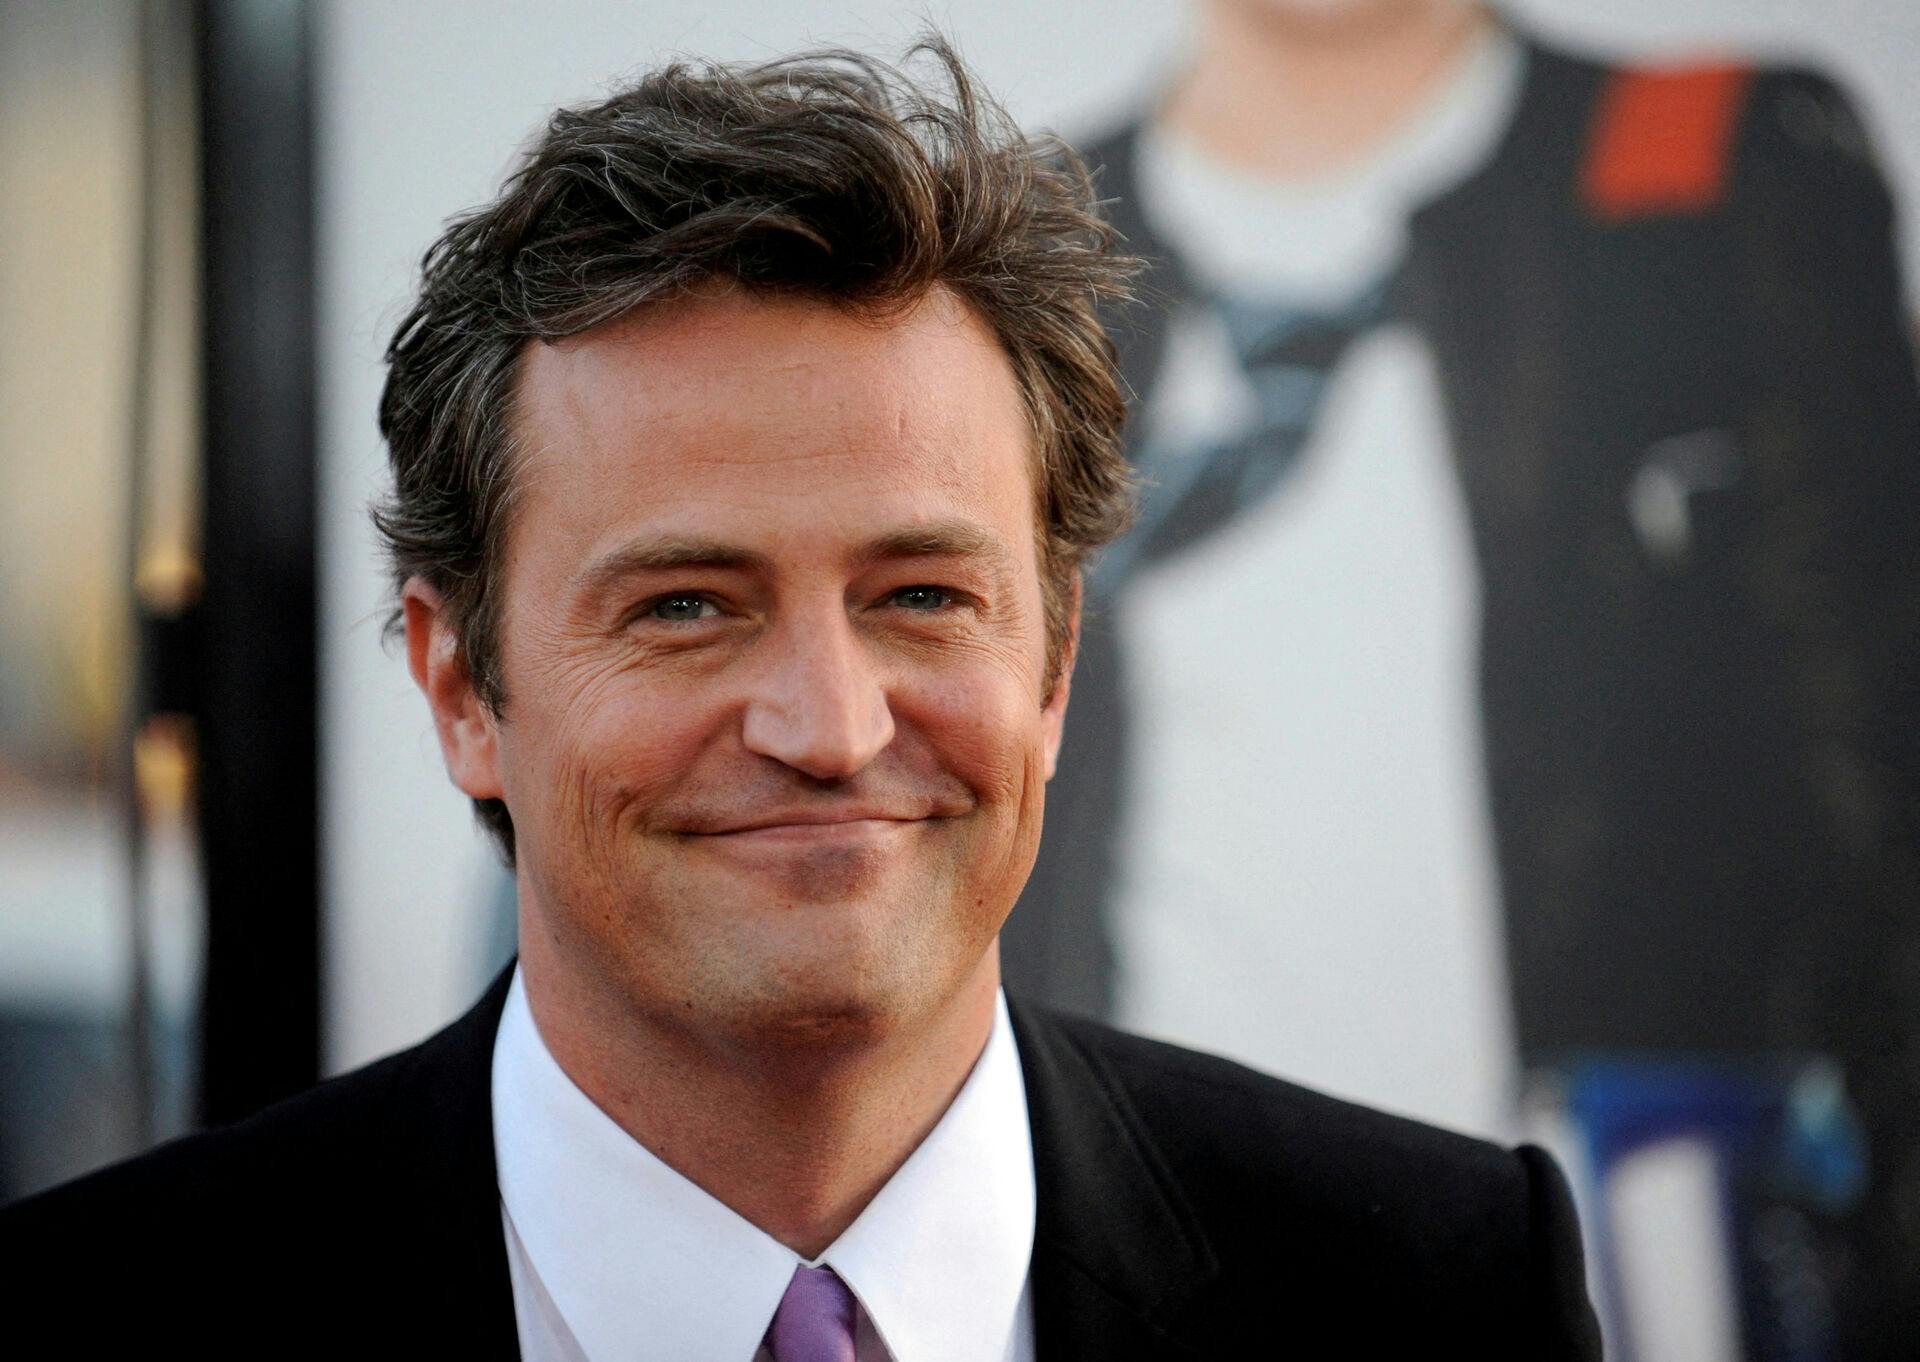 FILE PHOTO: Cast member Matthew Perry attends the premiere of the film "17 Again" in Los Angeles April 14, 2009. REUTERS/Phil McCarten/File Photo